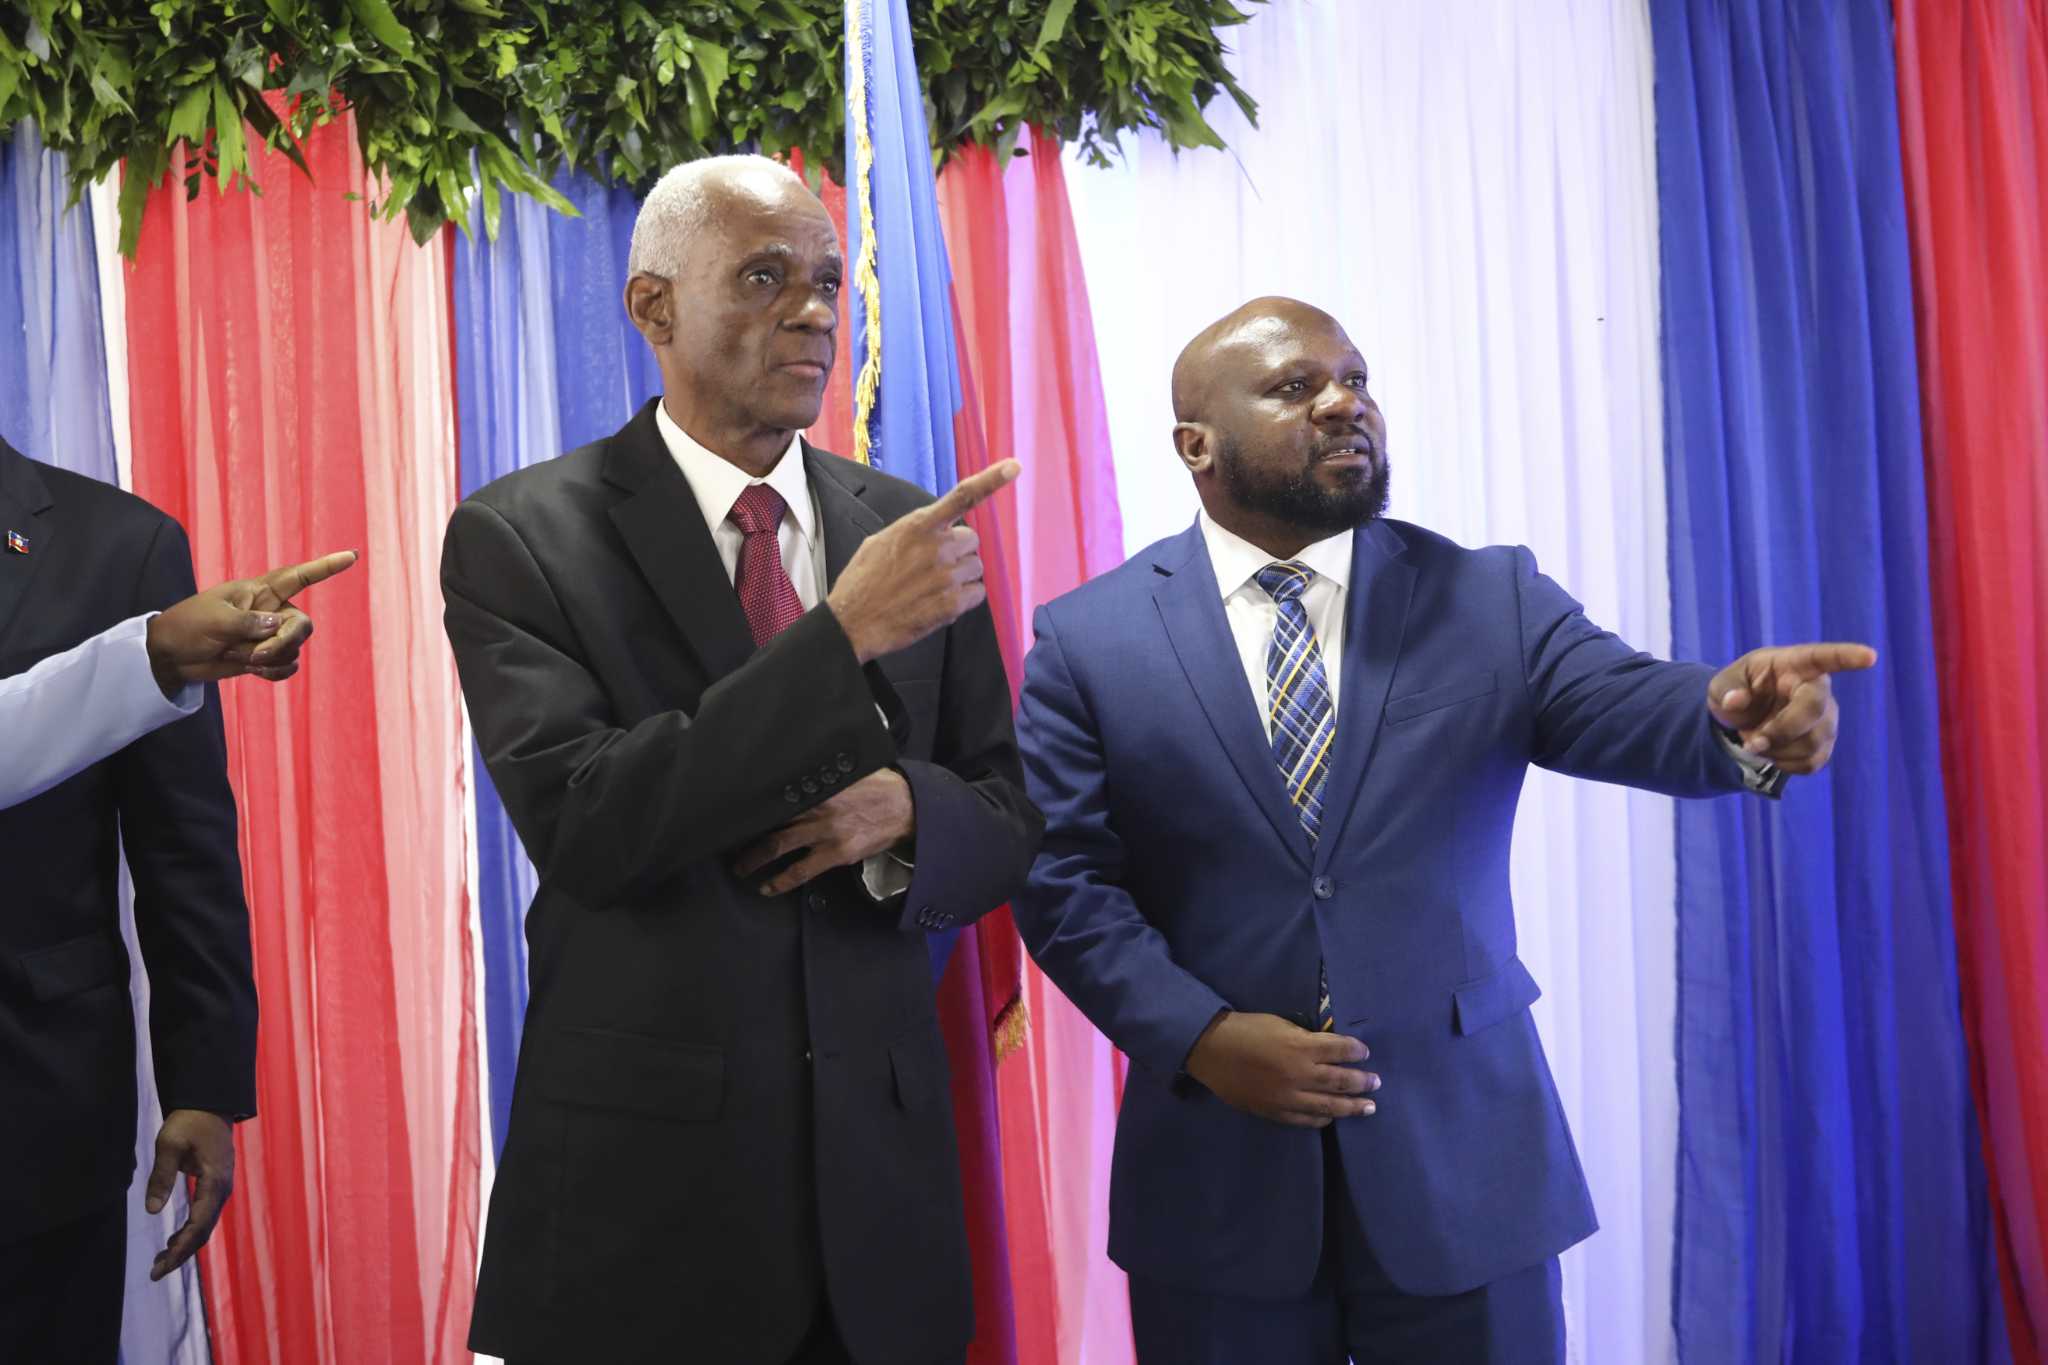 Haiti is seeking a new prime minister. Dozens of candidates jostle for the key job